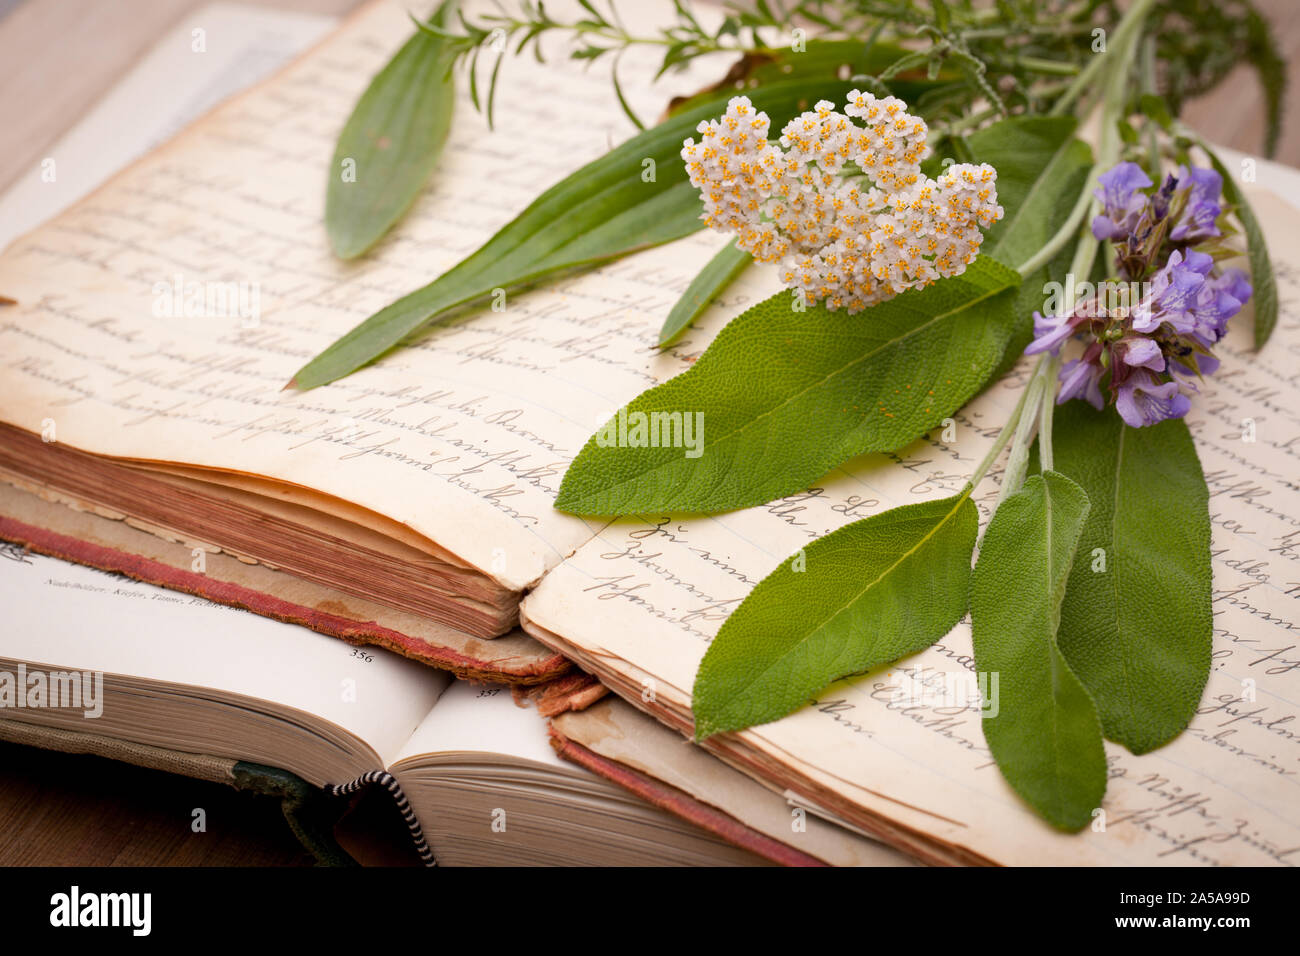 Old books and medicinal plants Stock Photo